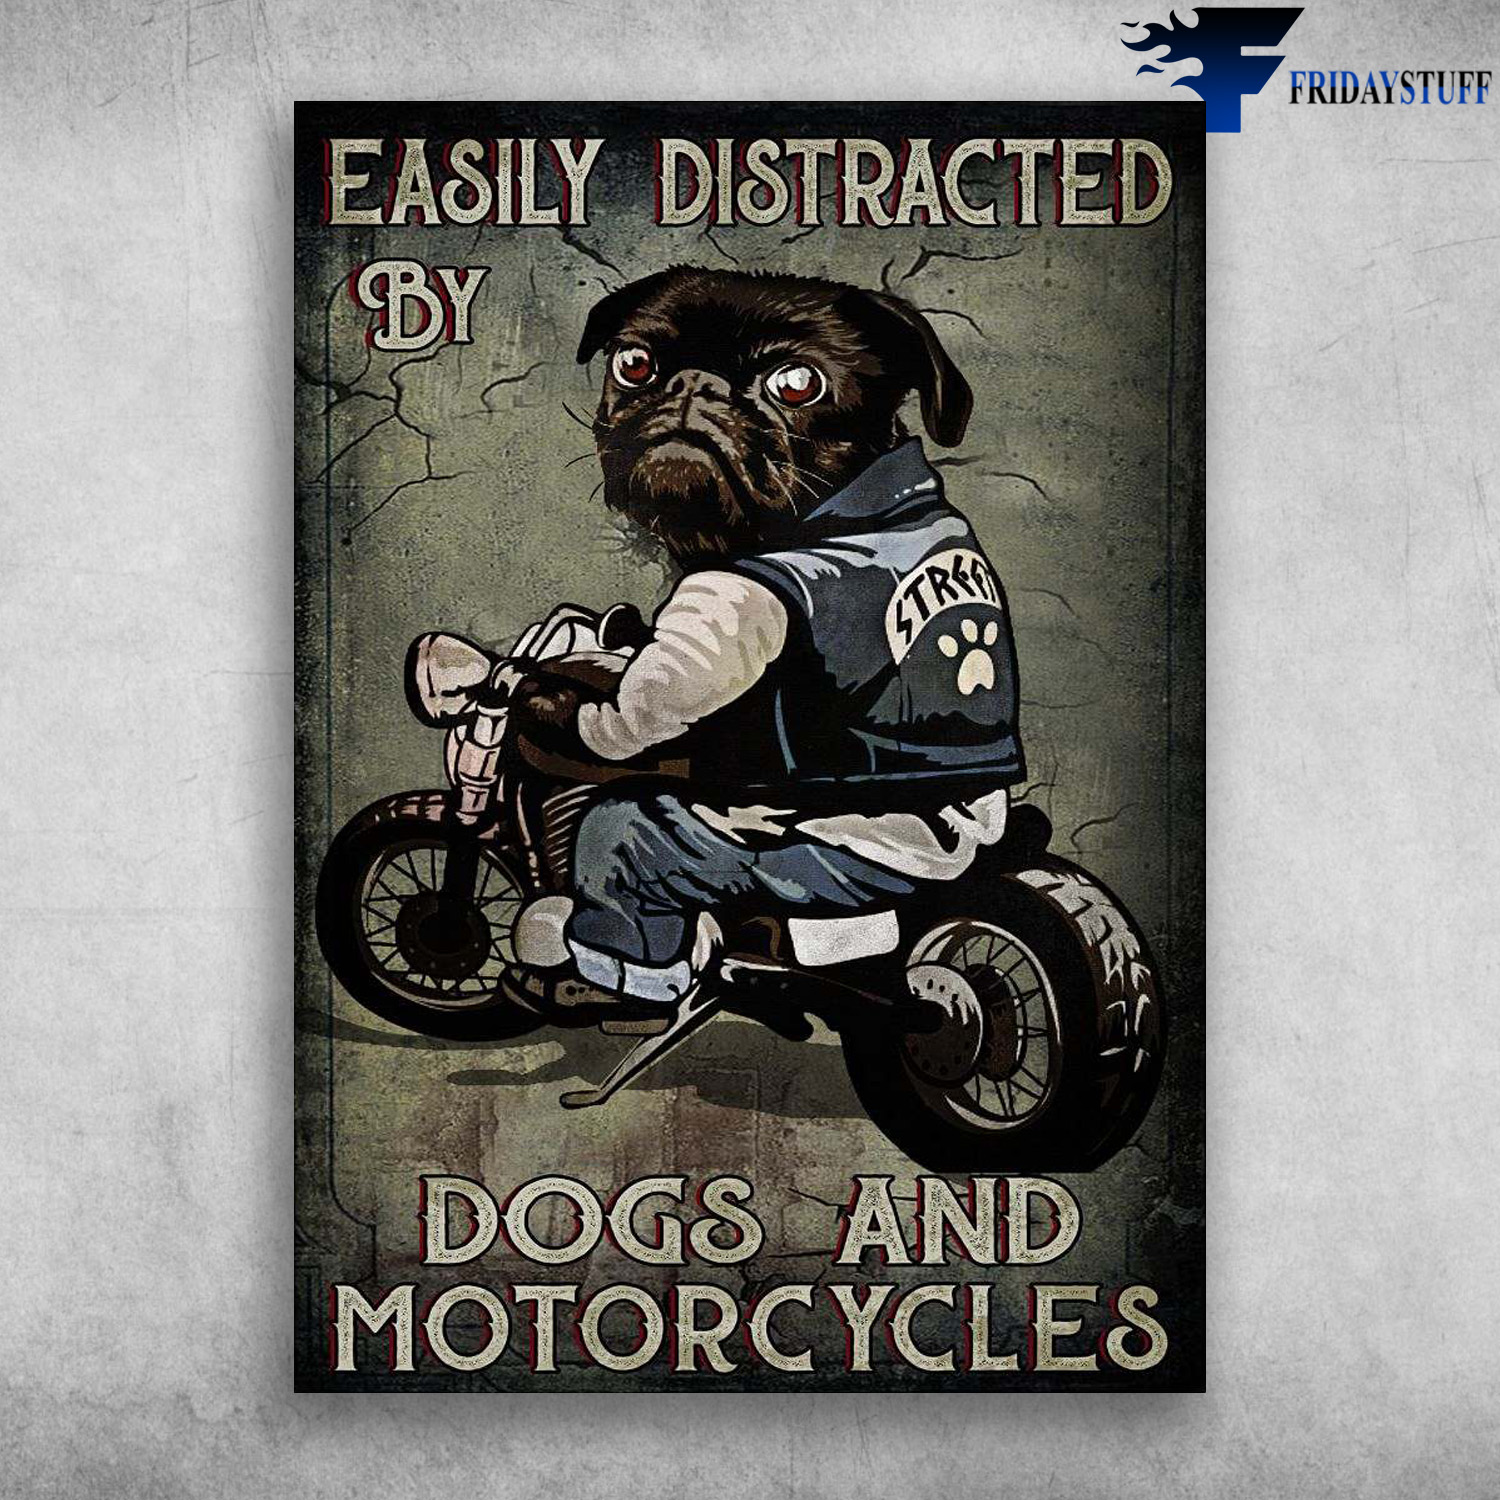 Motorcycle Dog - Easily Distracted By, Dogs And Motorcycles